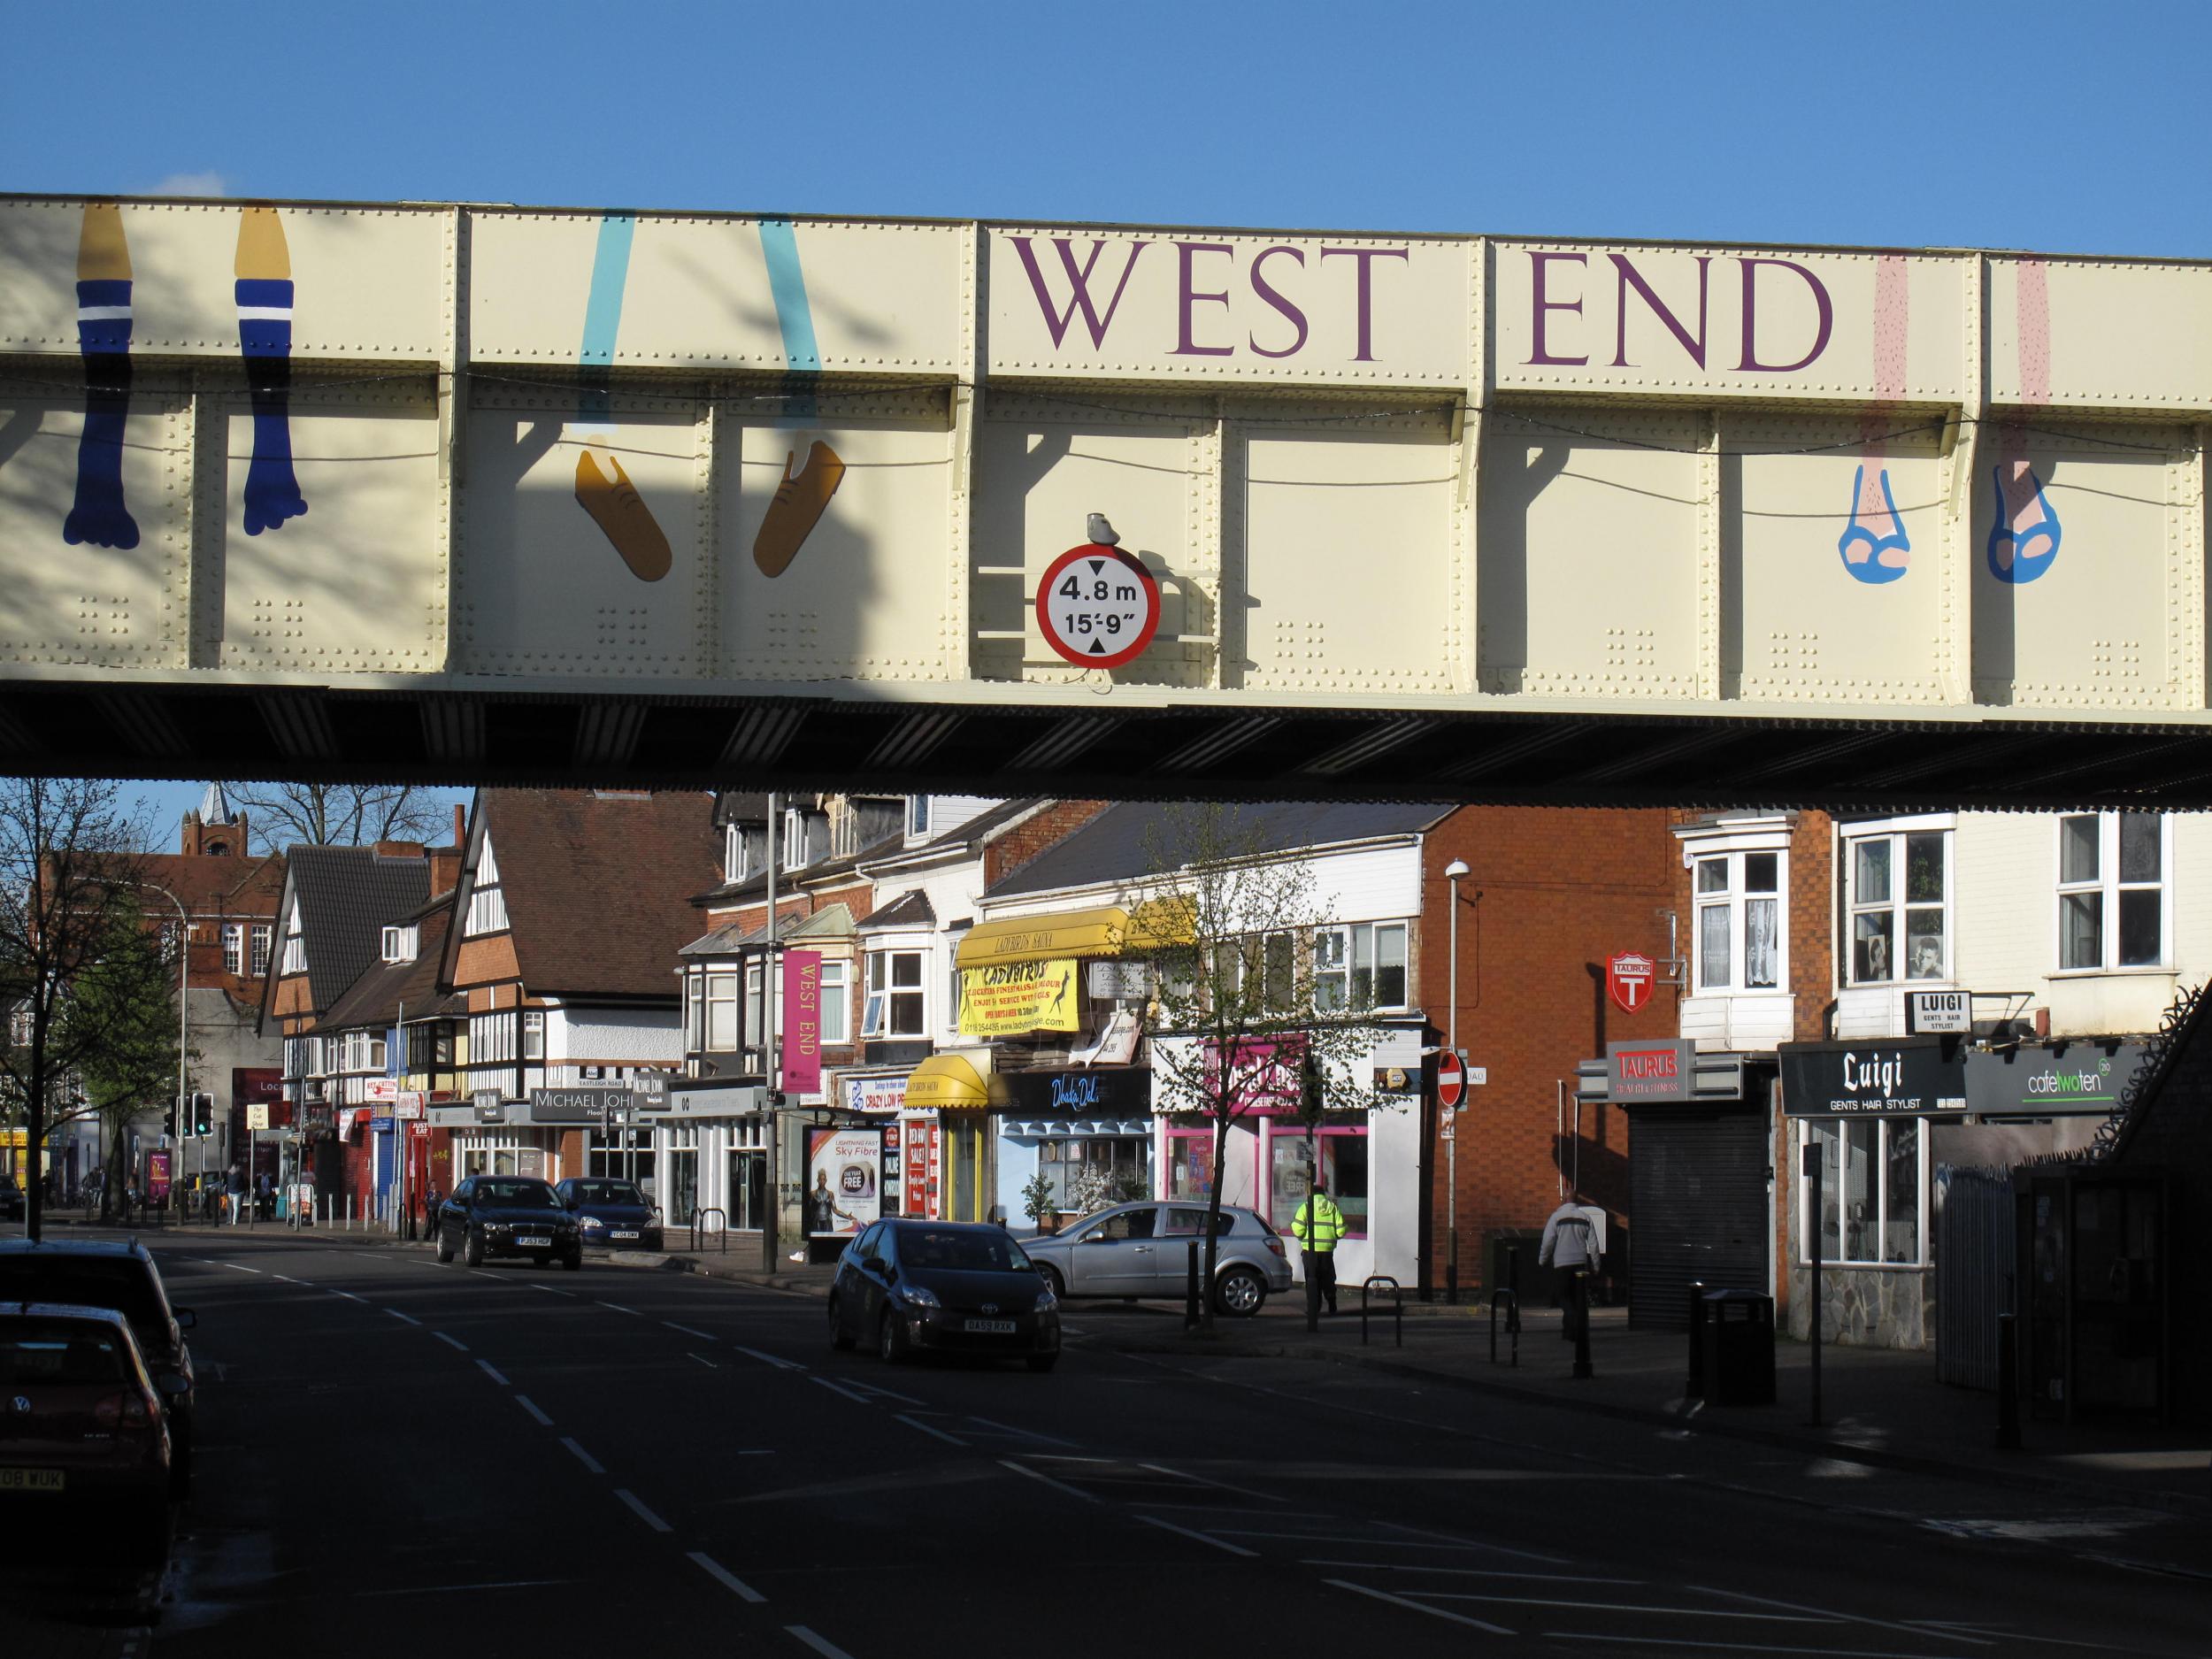 Railway bridge over Narborough Road, the most diverse street in Britain